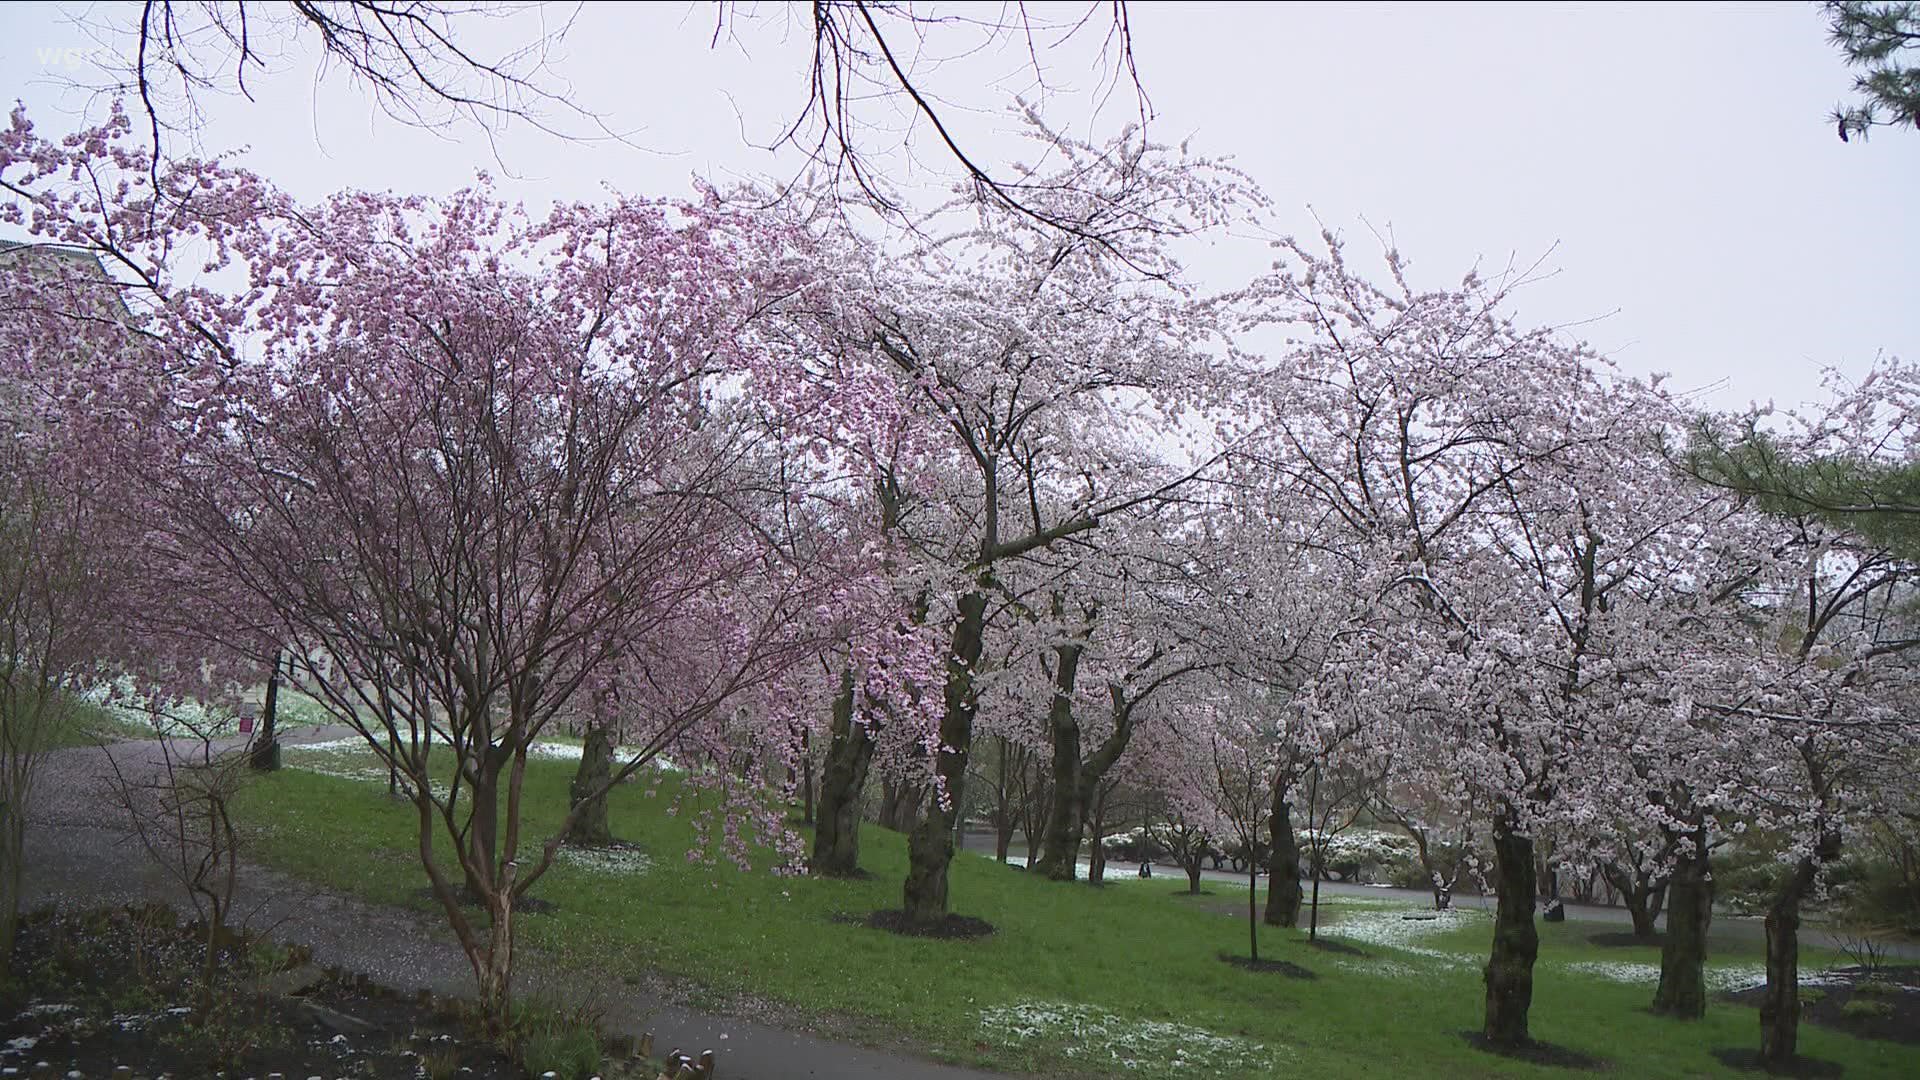 Festival organizers promise the snow won't damper the blossoms.